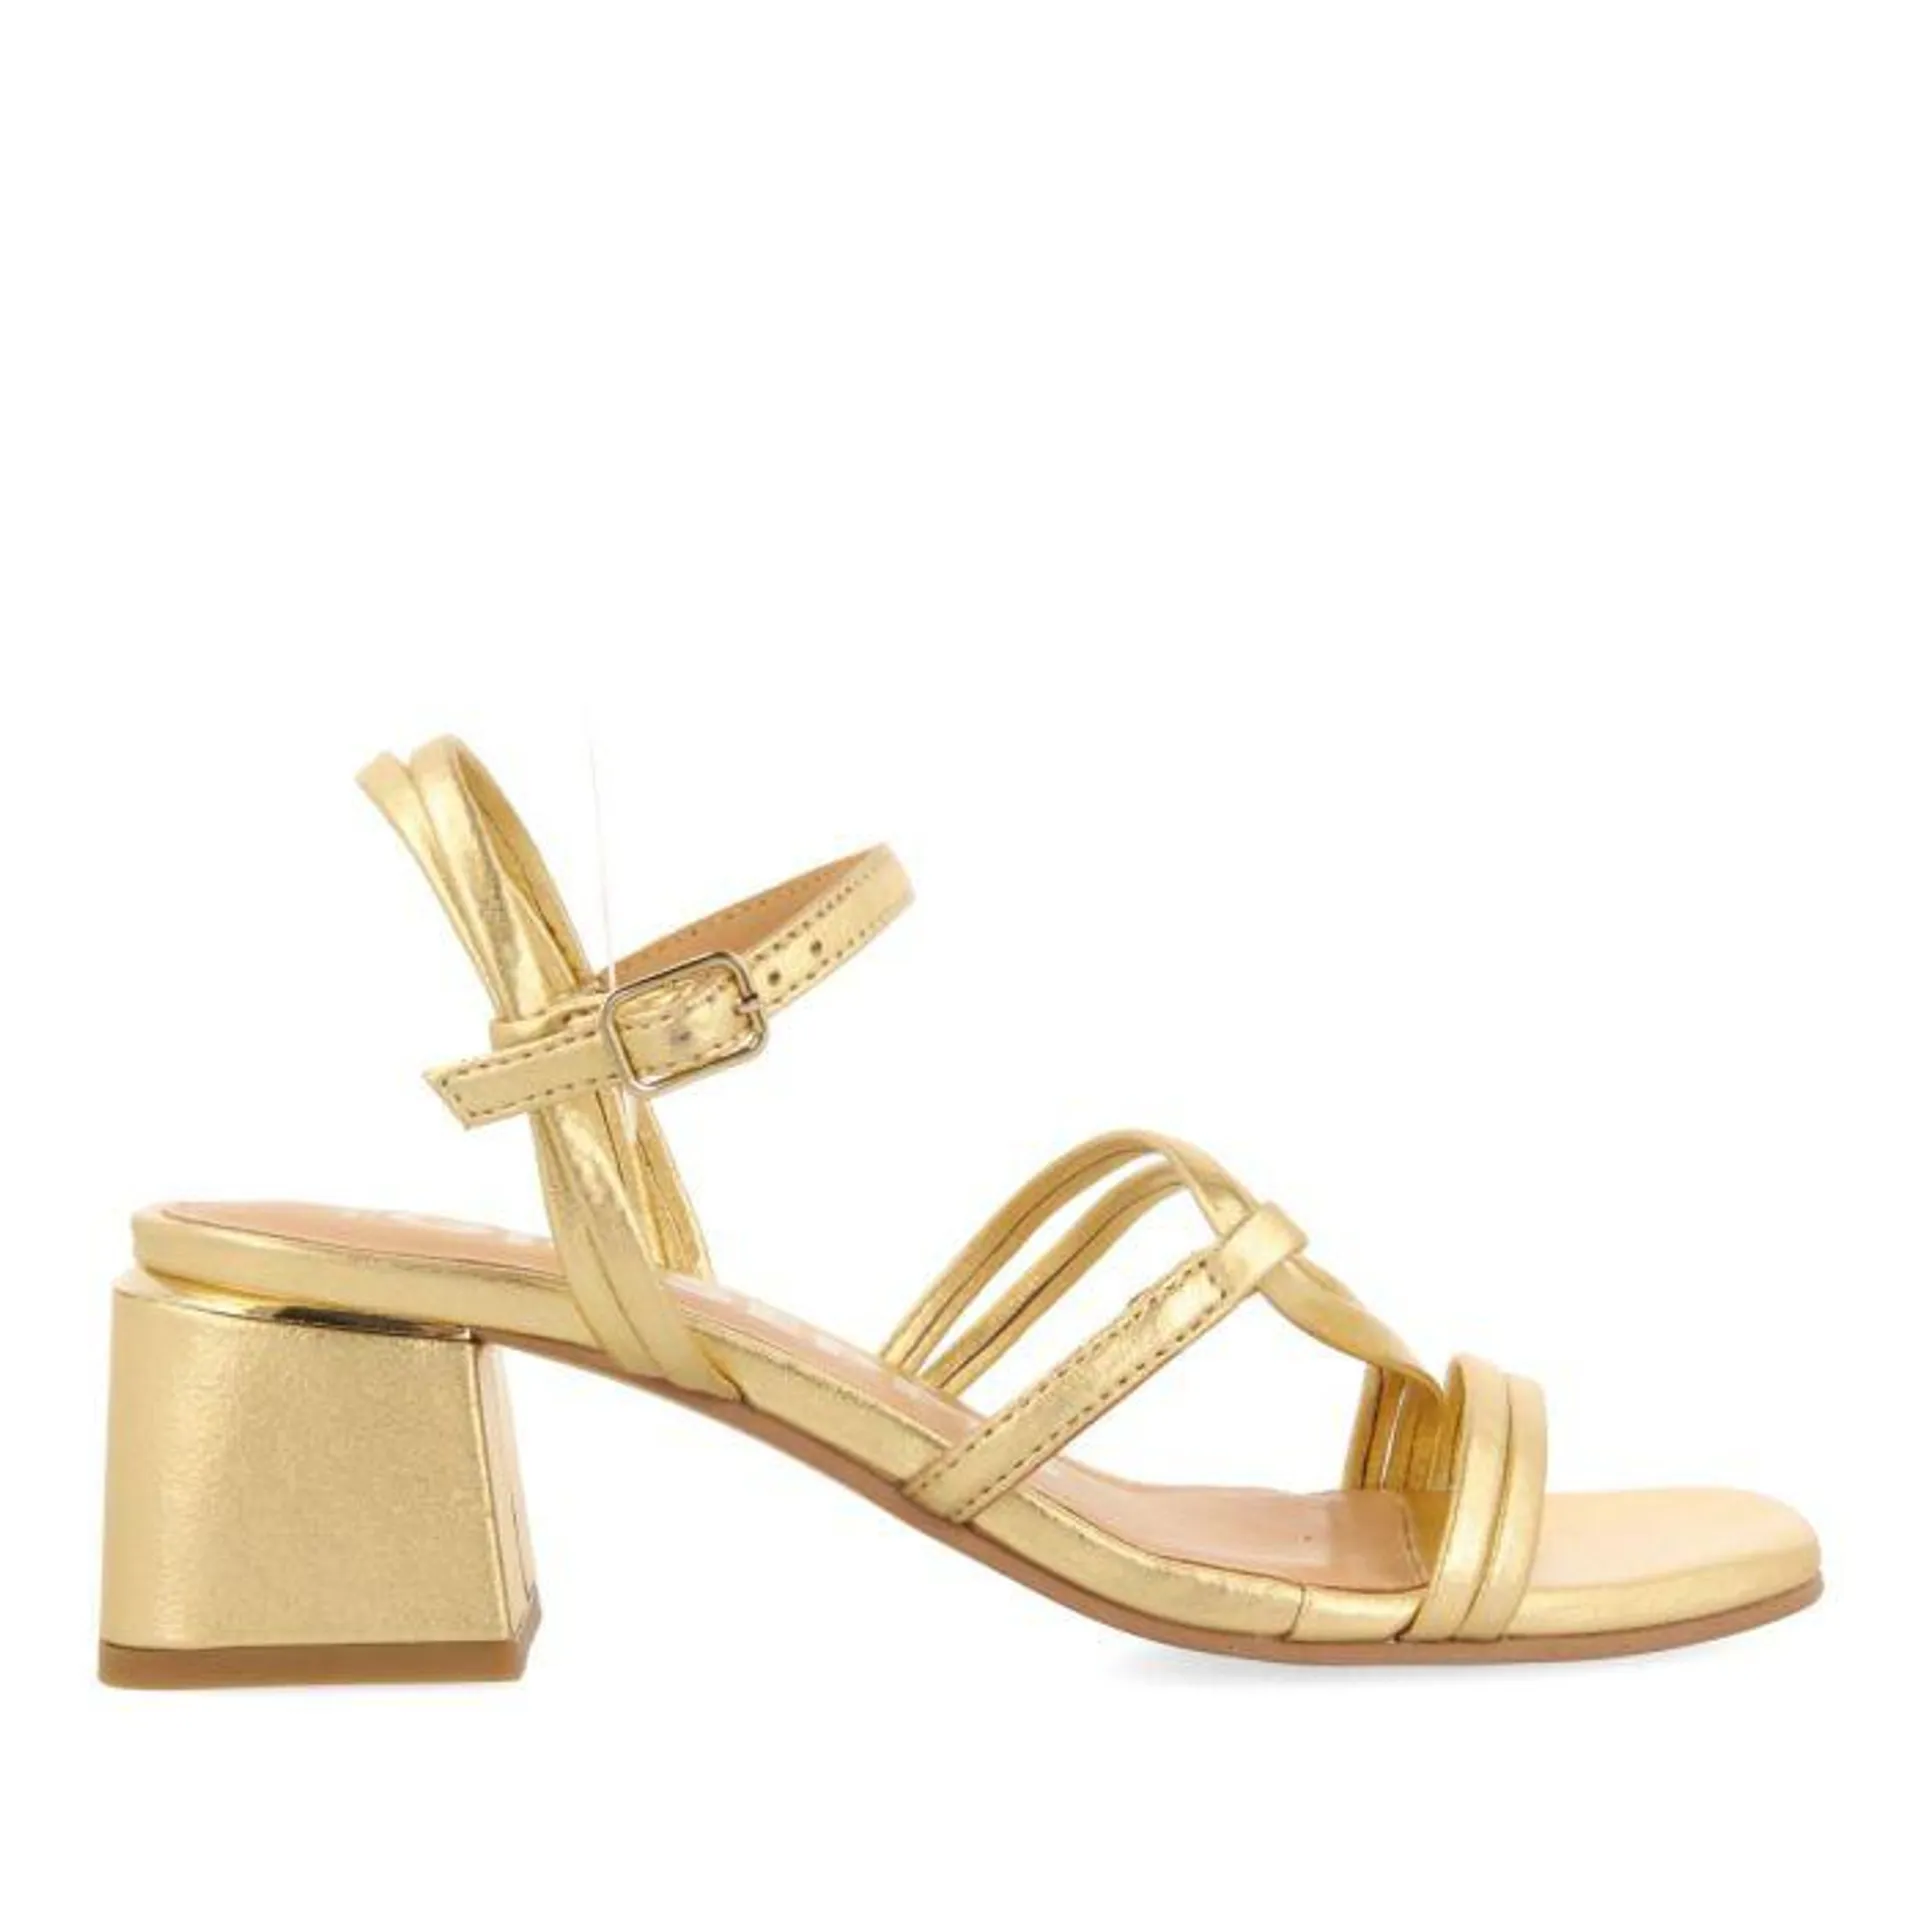 GOLDEN HEEL SANDALS WITH BRAIDED STRAPS FOR WOMEN PUSTEC